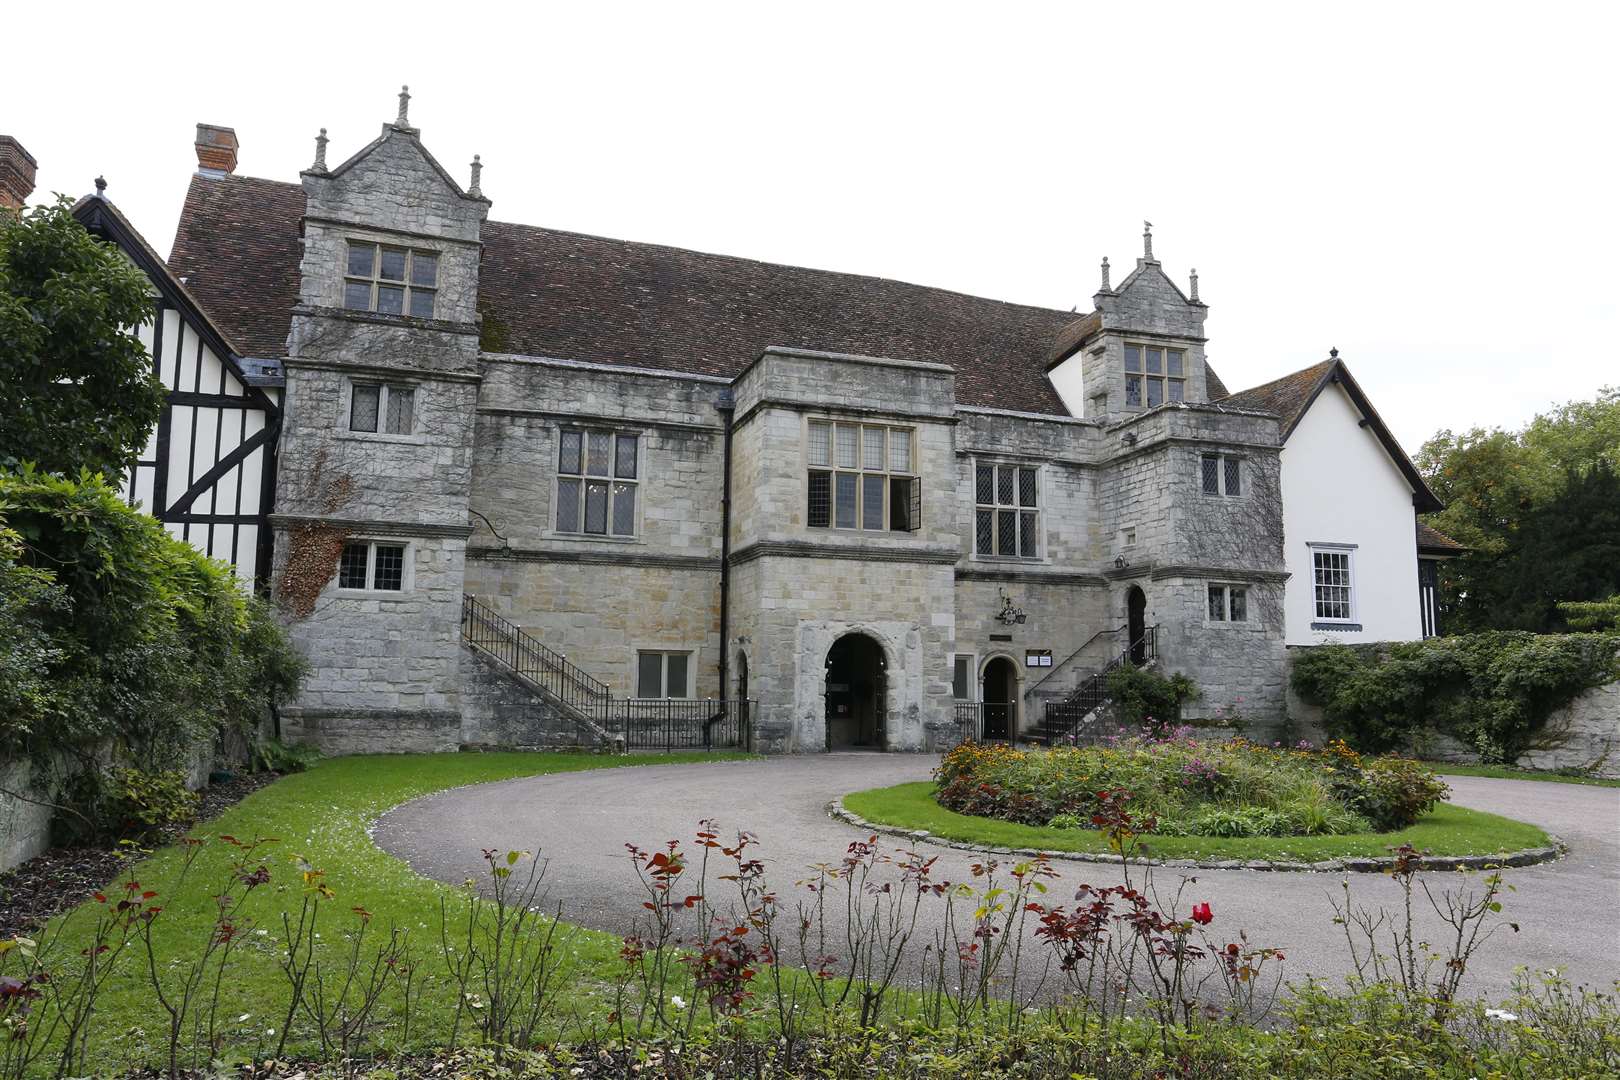 The inquest was at the.Archbishop’s Palace at Maidstone. Picture: Andy Jones